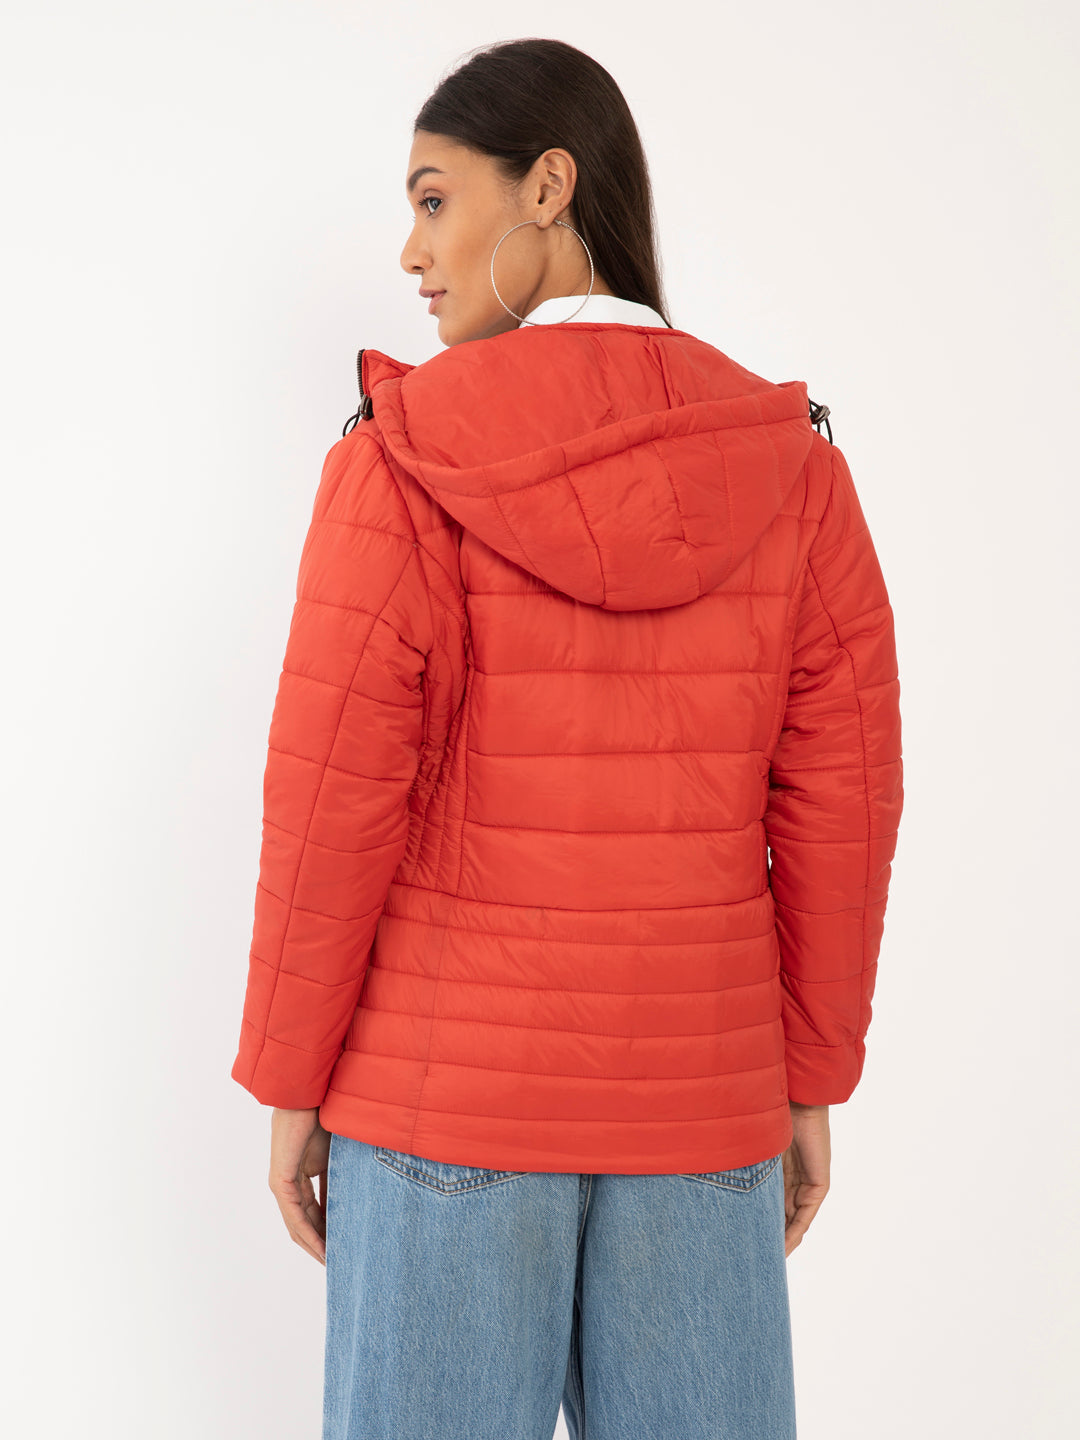 Orange Solid Quilted Jacket For Women